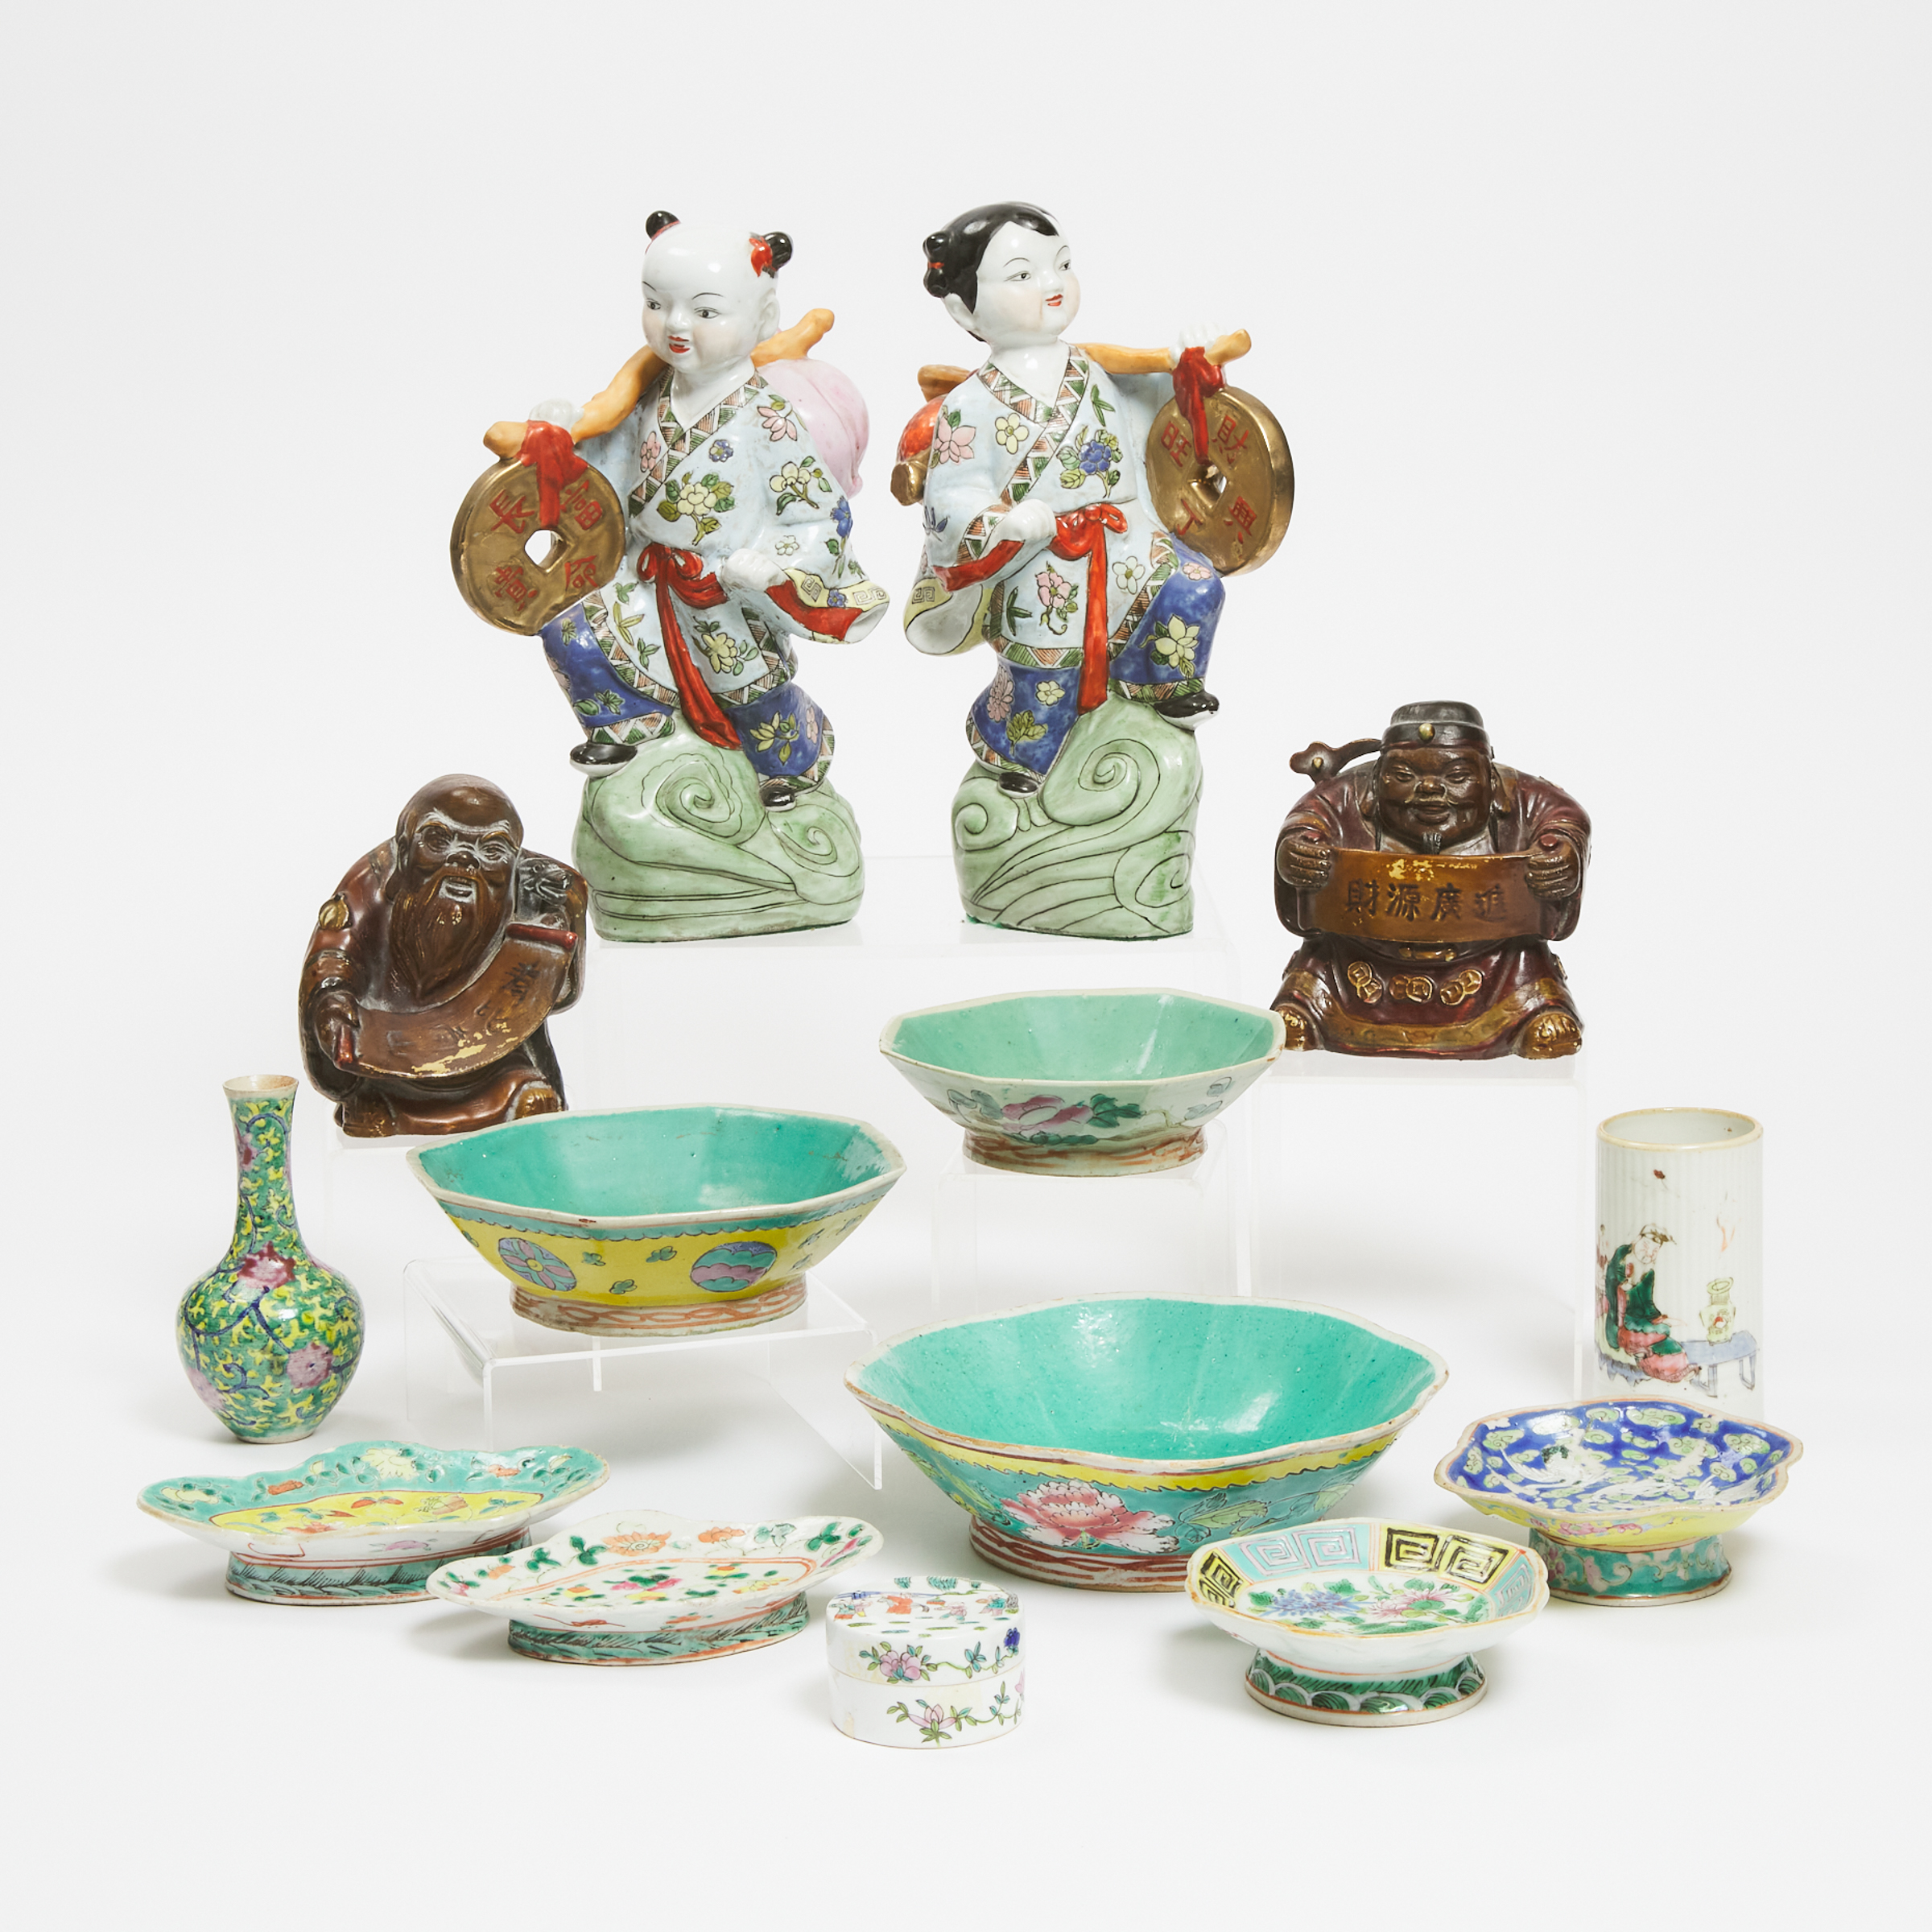 A Group of Fourteen Chinese Porcelain Dishes, Vases, and Figures, 19th/20th Century